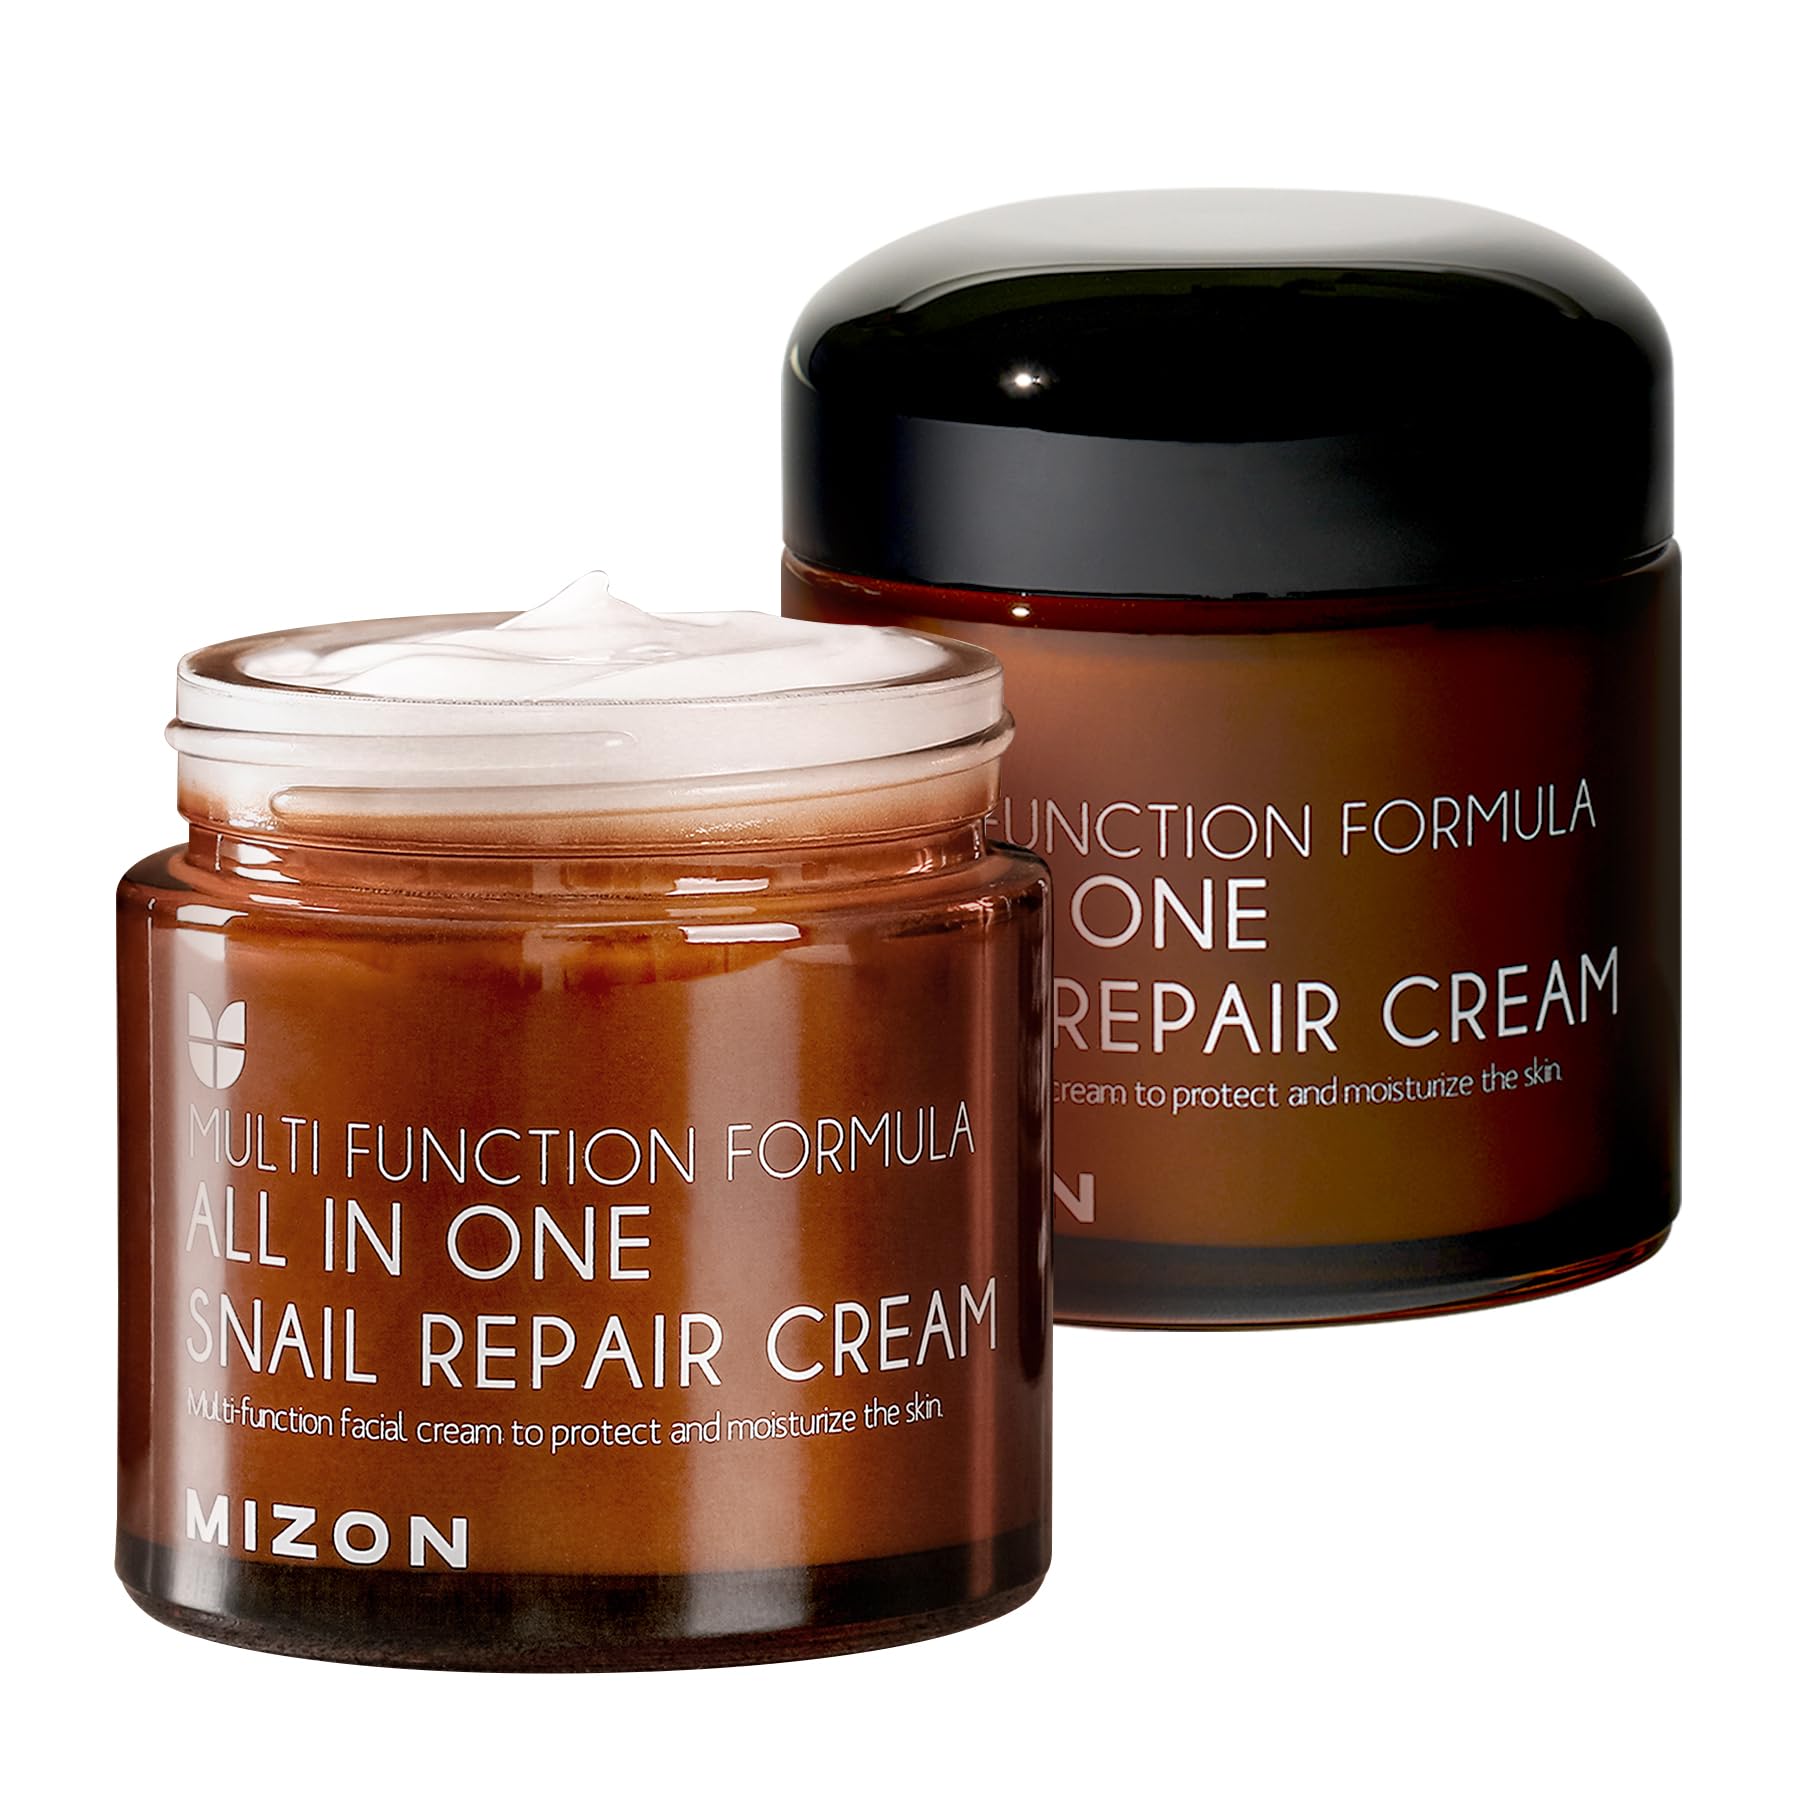 MIZON All in One Snail Repair cream, Face Moisturizer with Snail Mucin Extract, Recovery cream, Korean Skincare, Wrinkle & Blemi